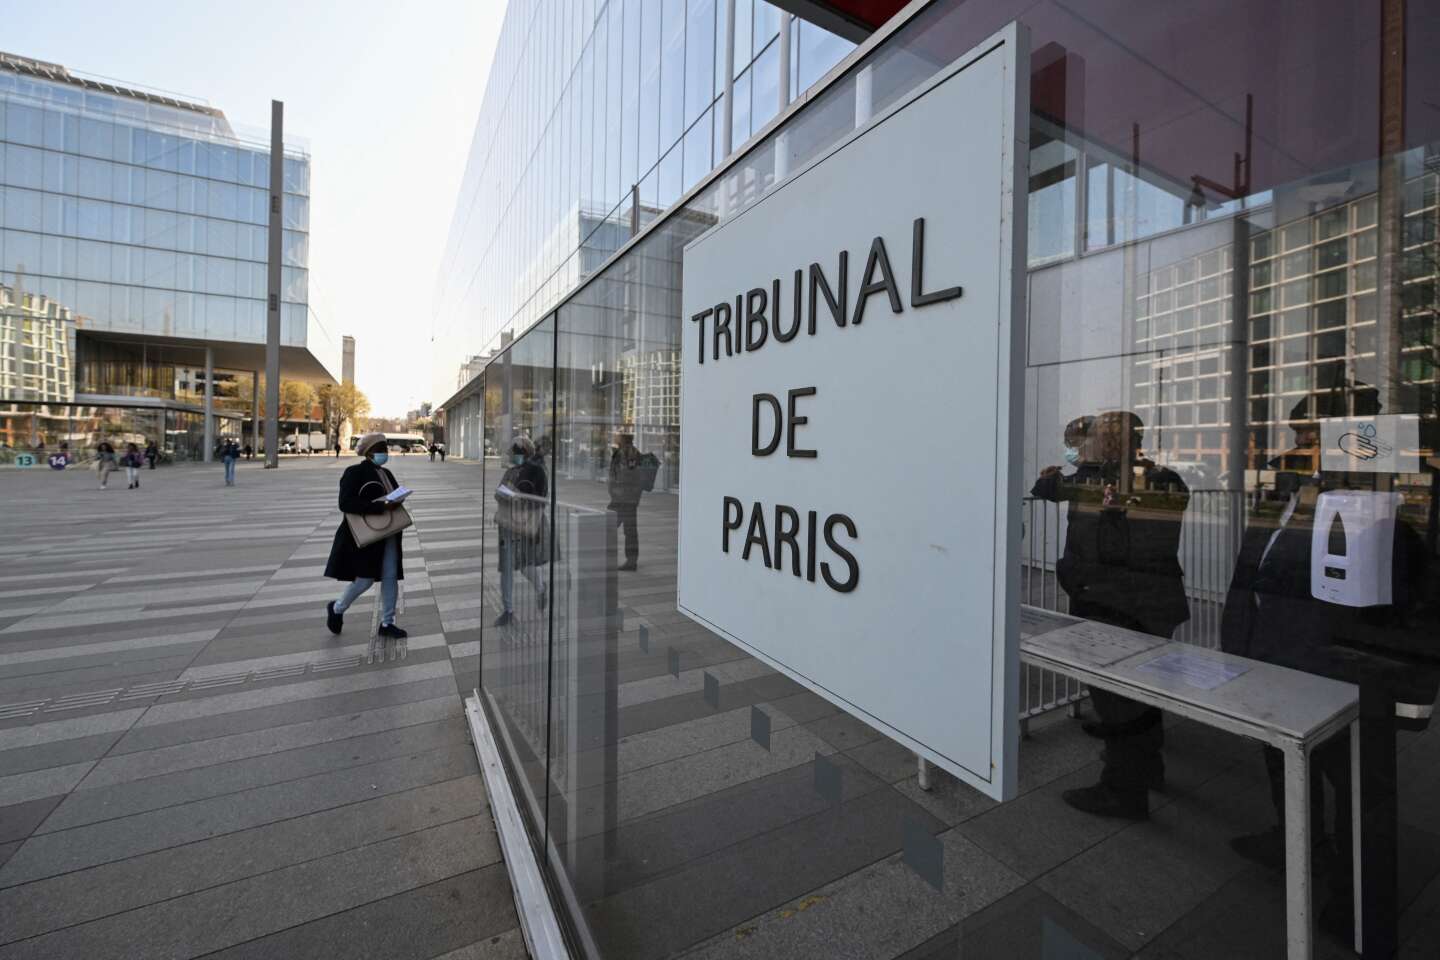 police violence at the Paris court, the prosecution opens an investigation